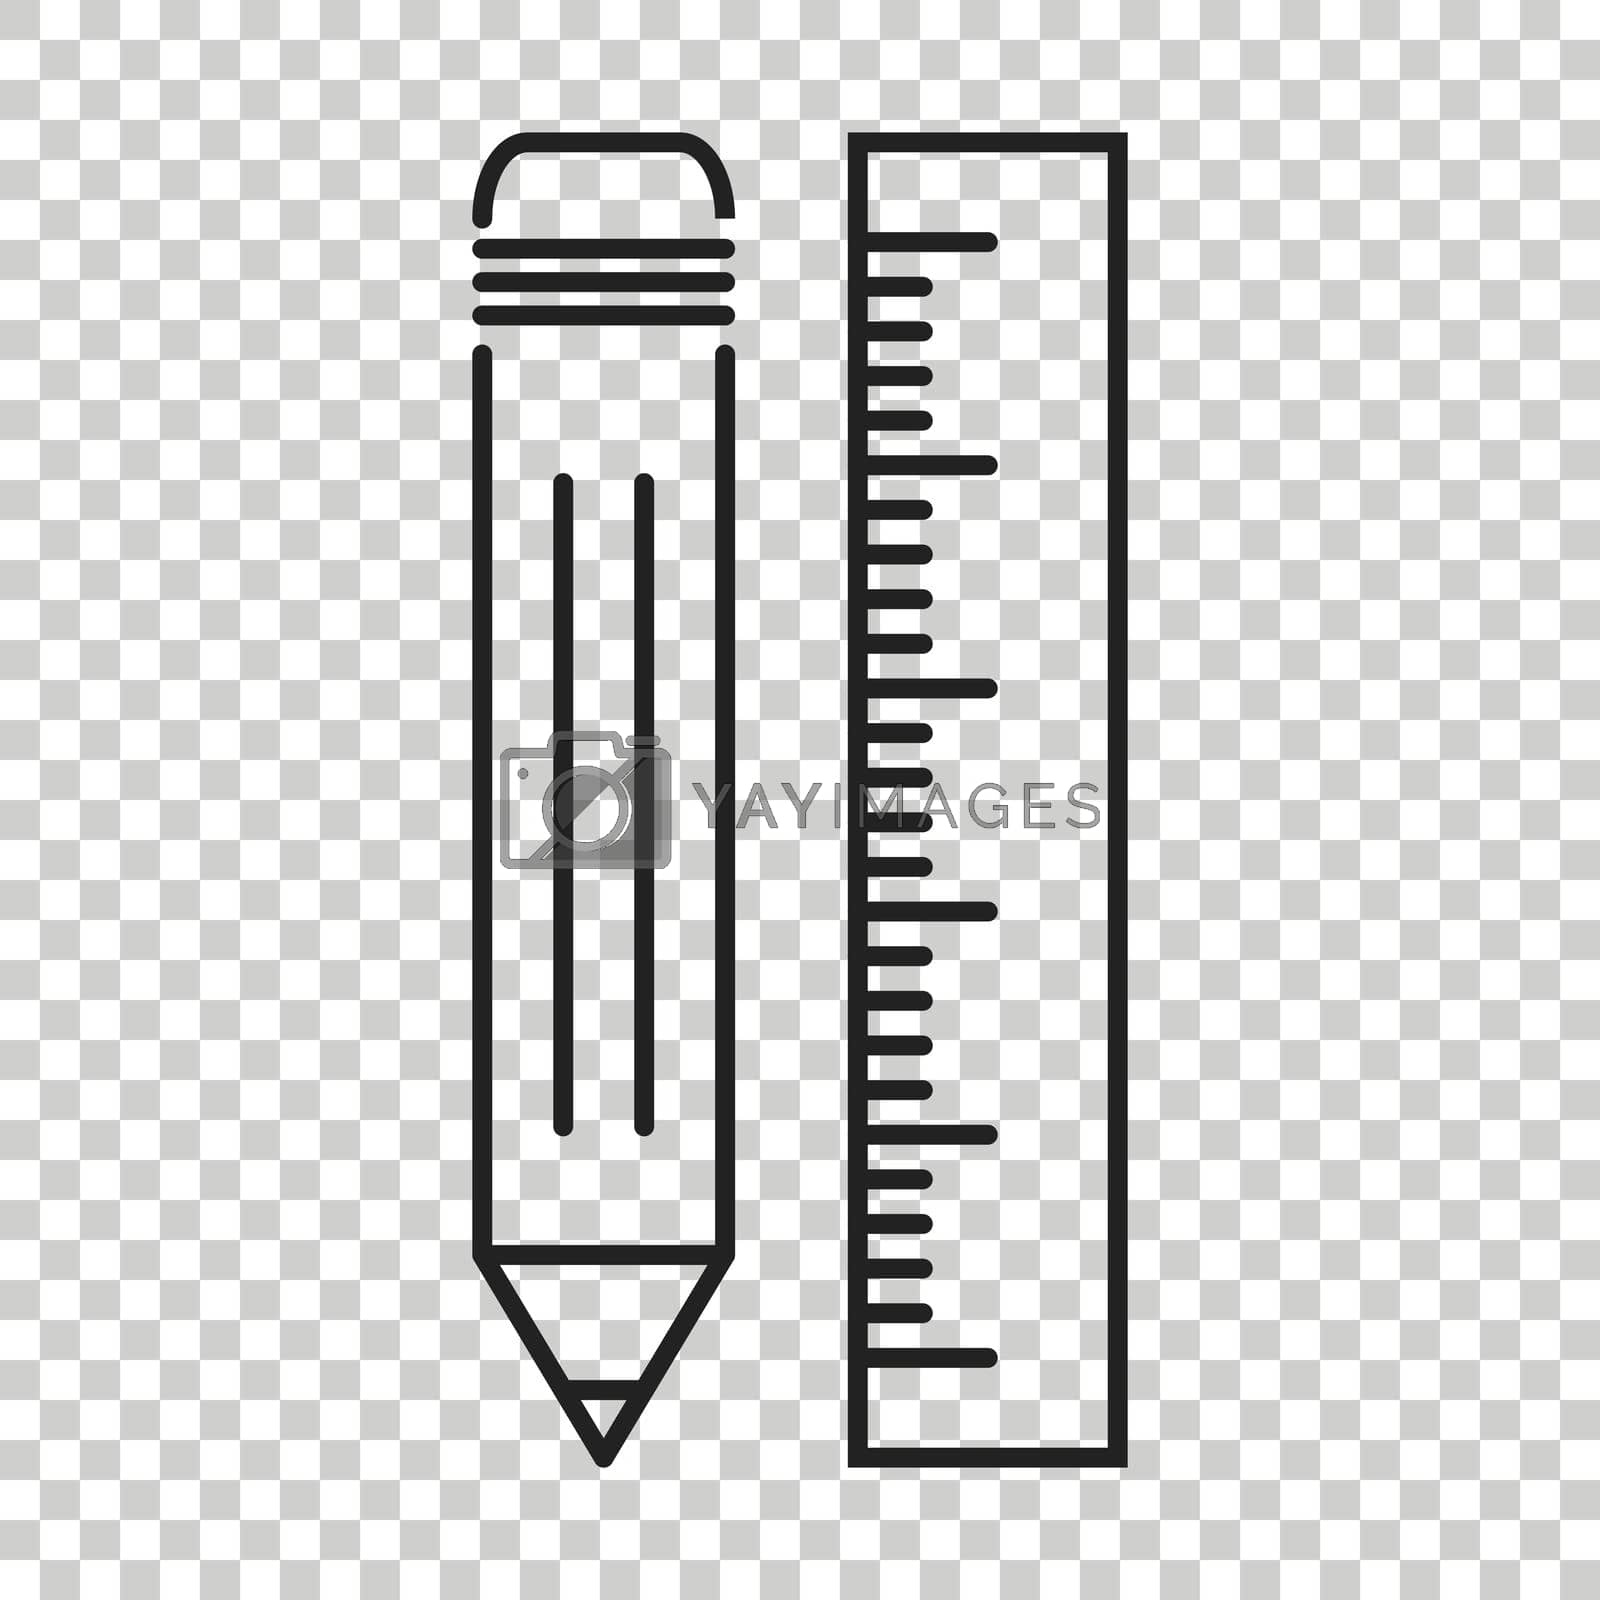 Royalty free image of Pencil with ruler icon. Ruler meter vector illustration. by LysenkoA